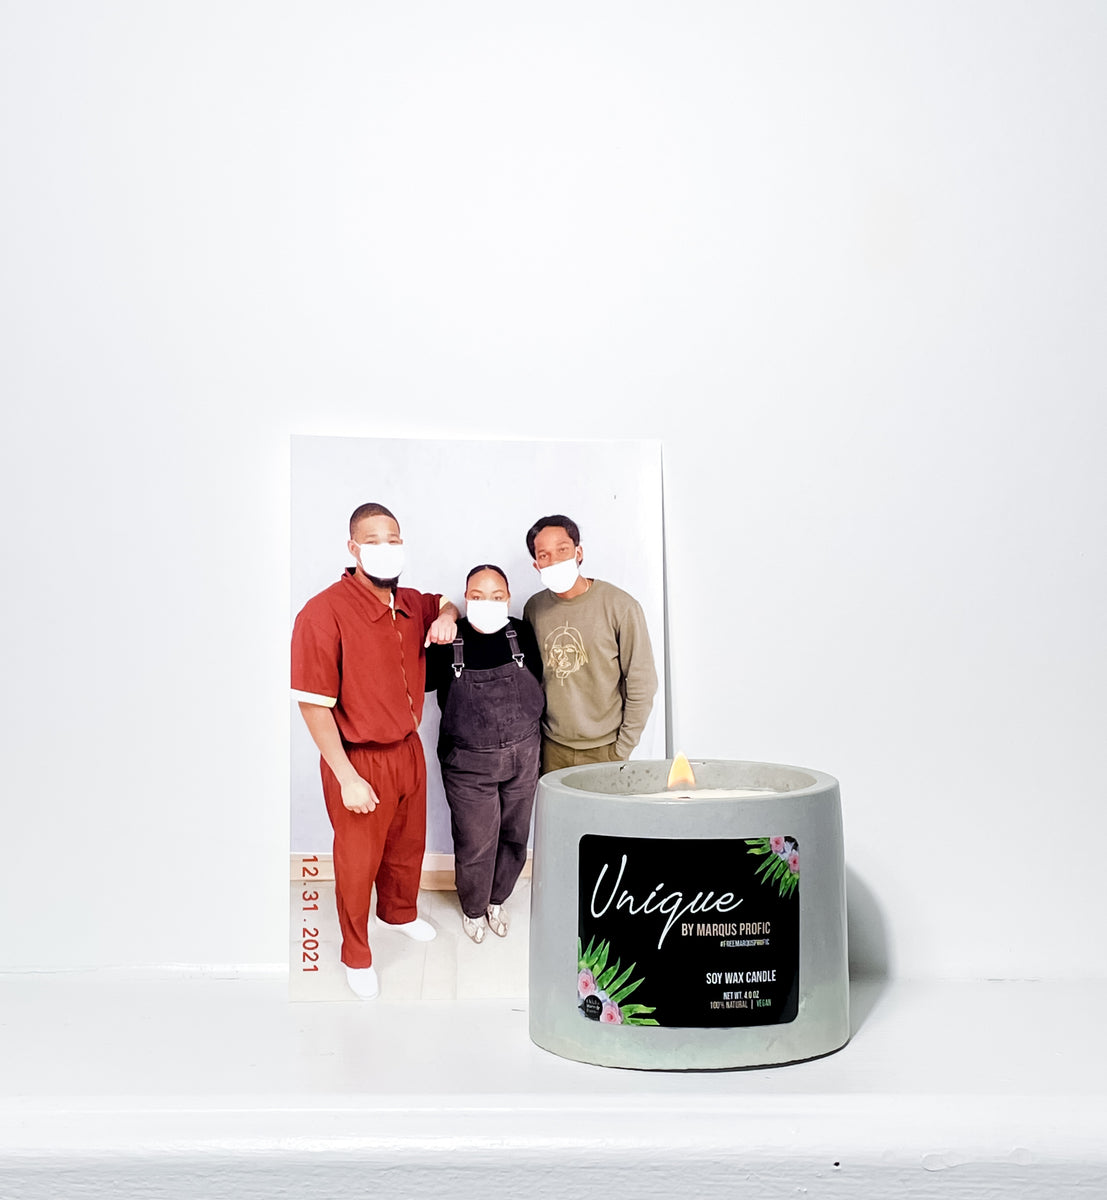 Unique by Marqus Profic - Luxury Coconut Soy Wax Candles - Set